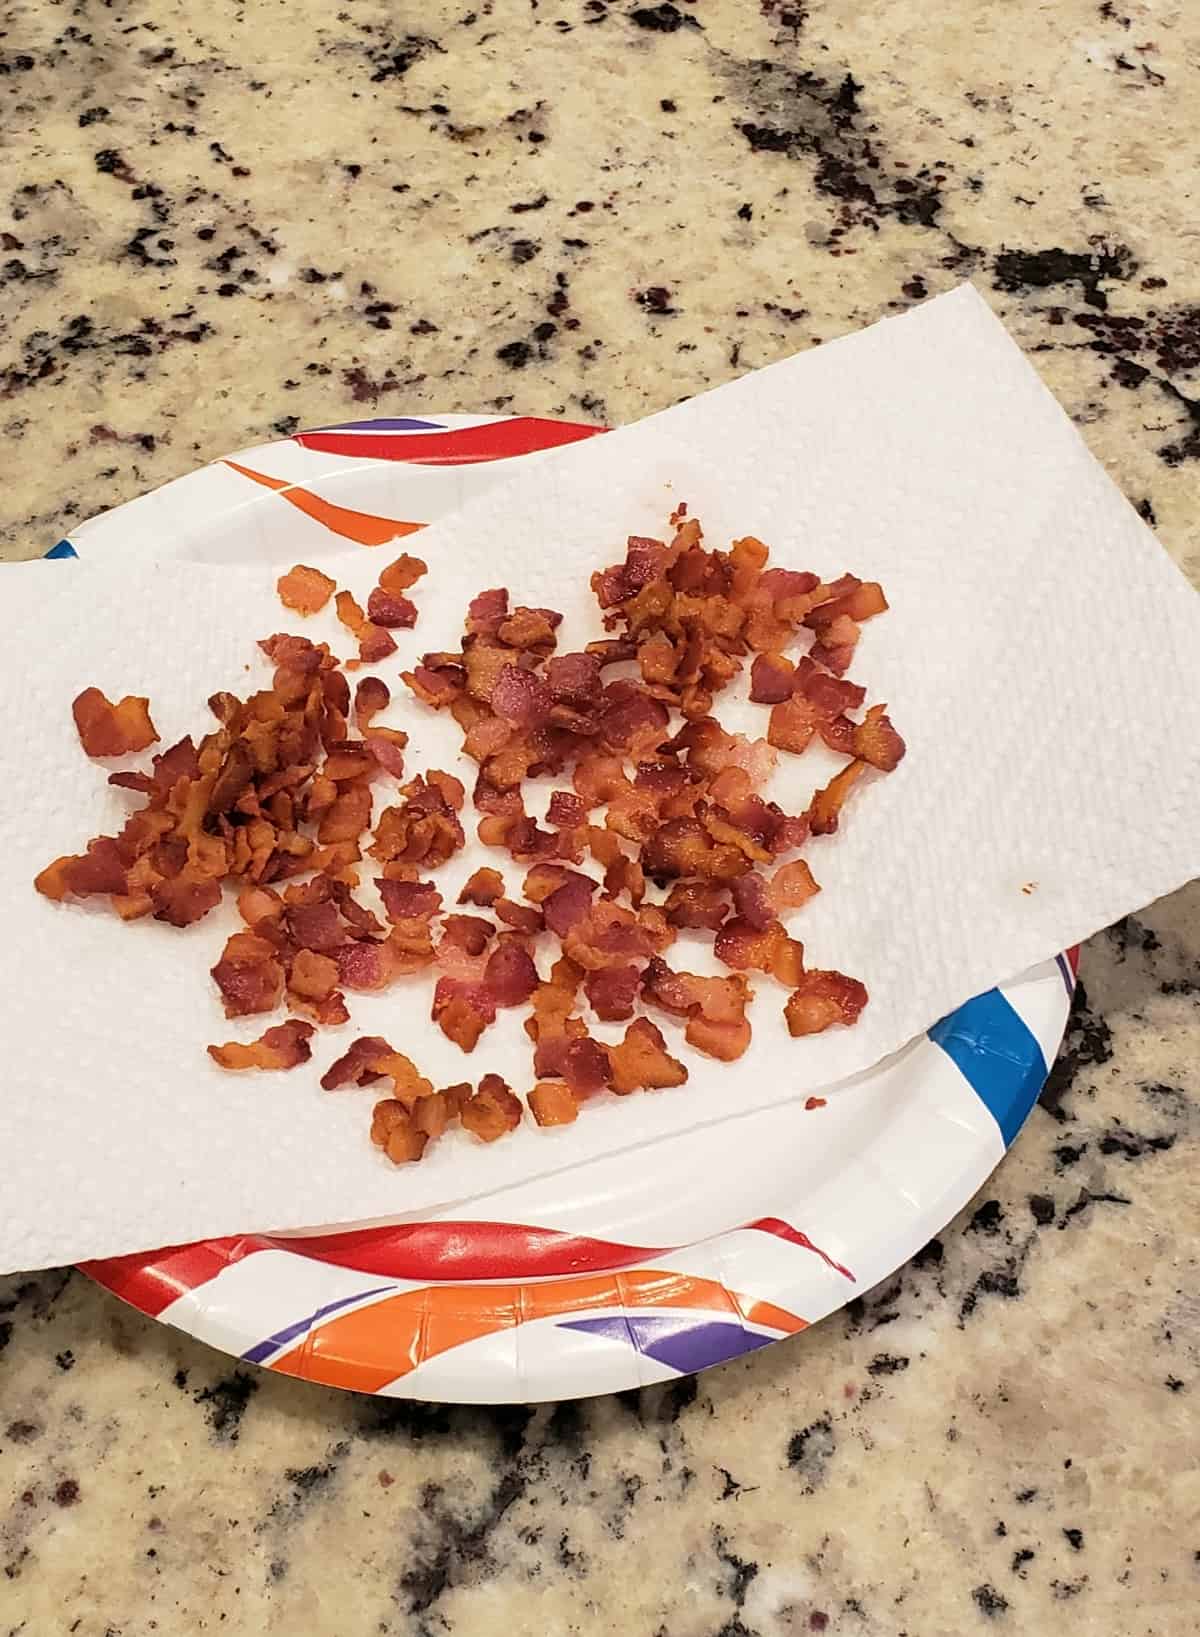 Bacon bits draining on paper towels on a paper plate.